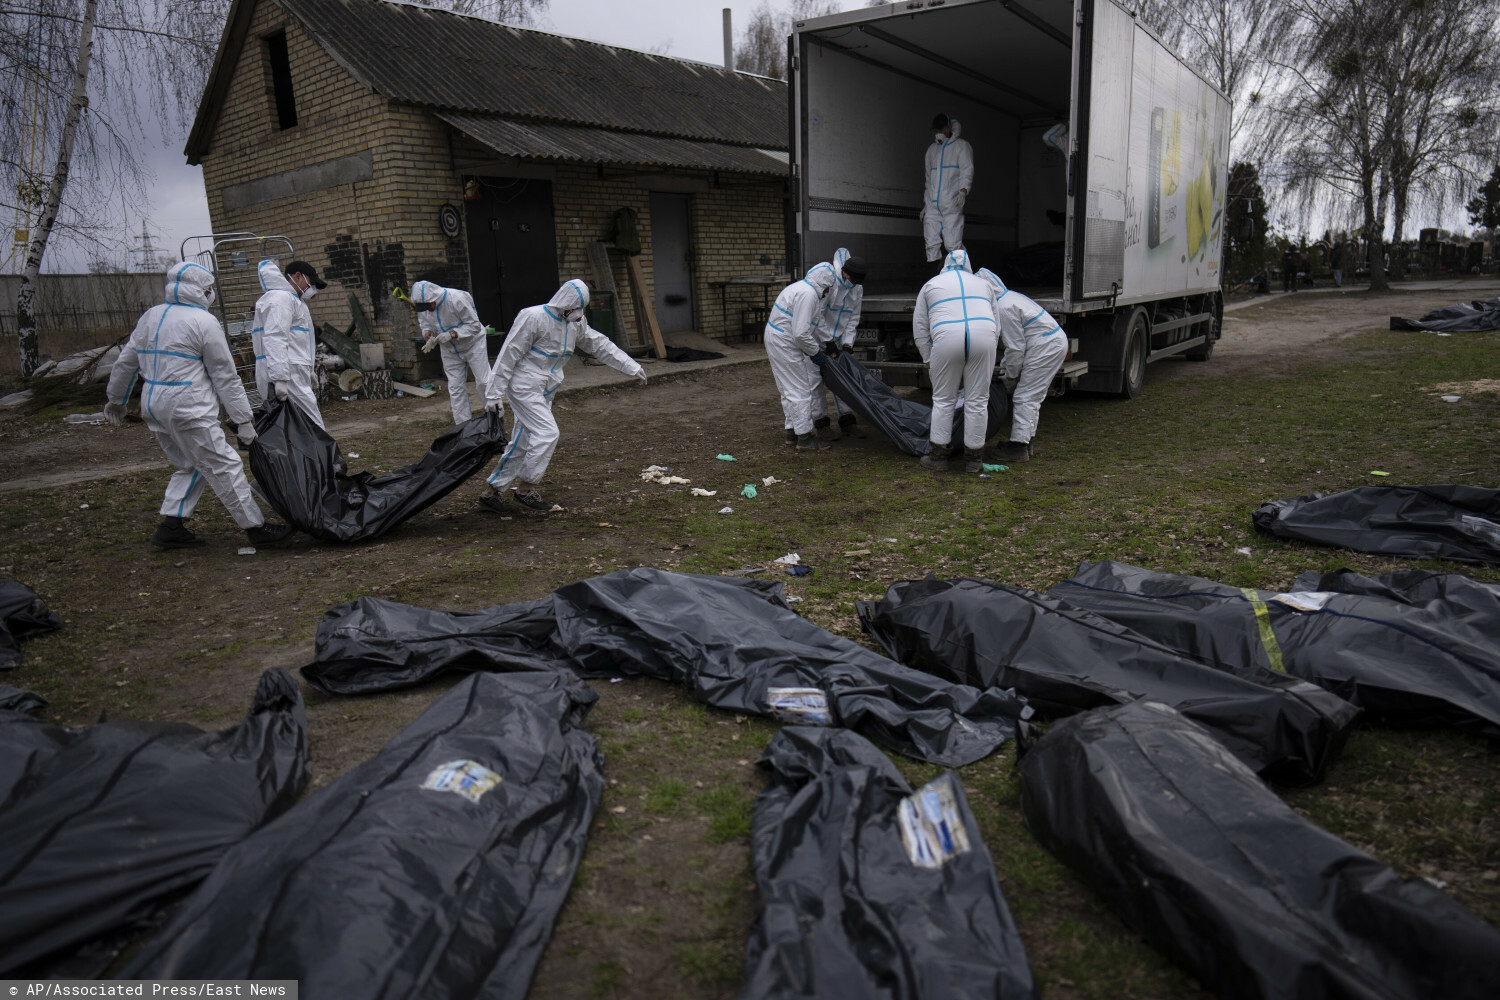 Germany will provide Ukraine with 10 refrigerated containers for storing the bodies of deceased soldiers